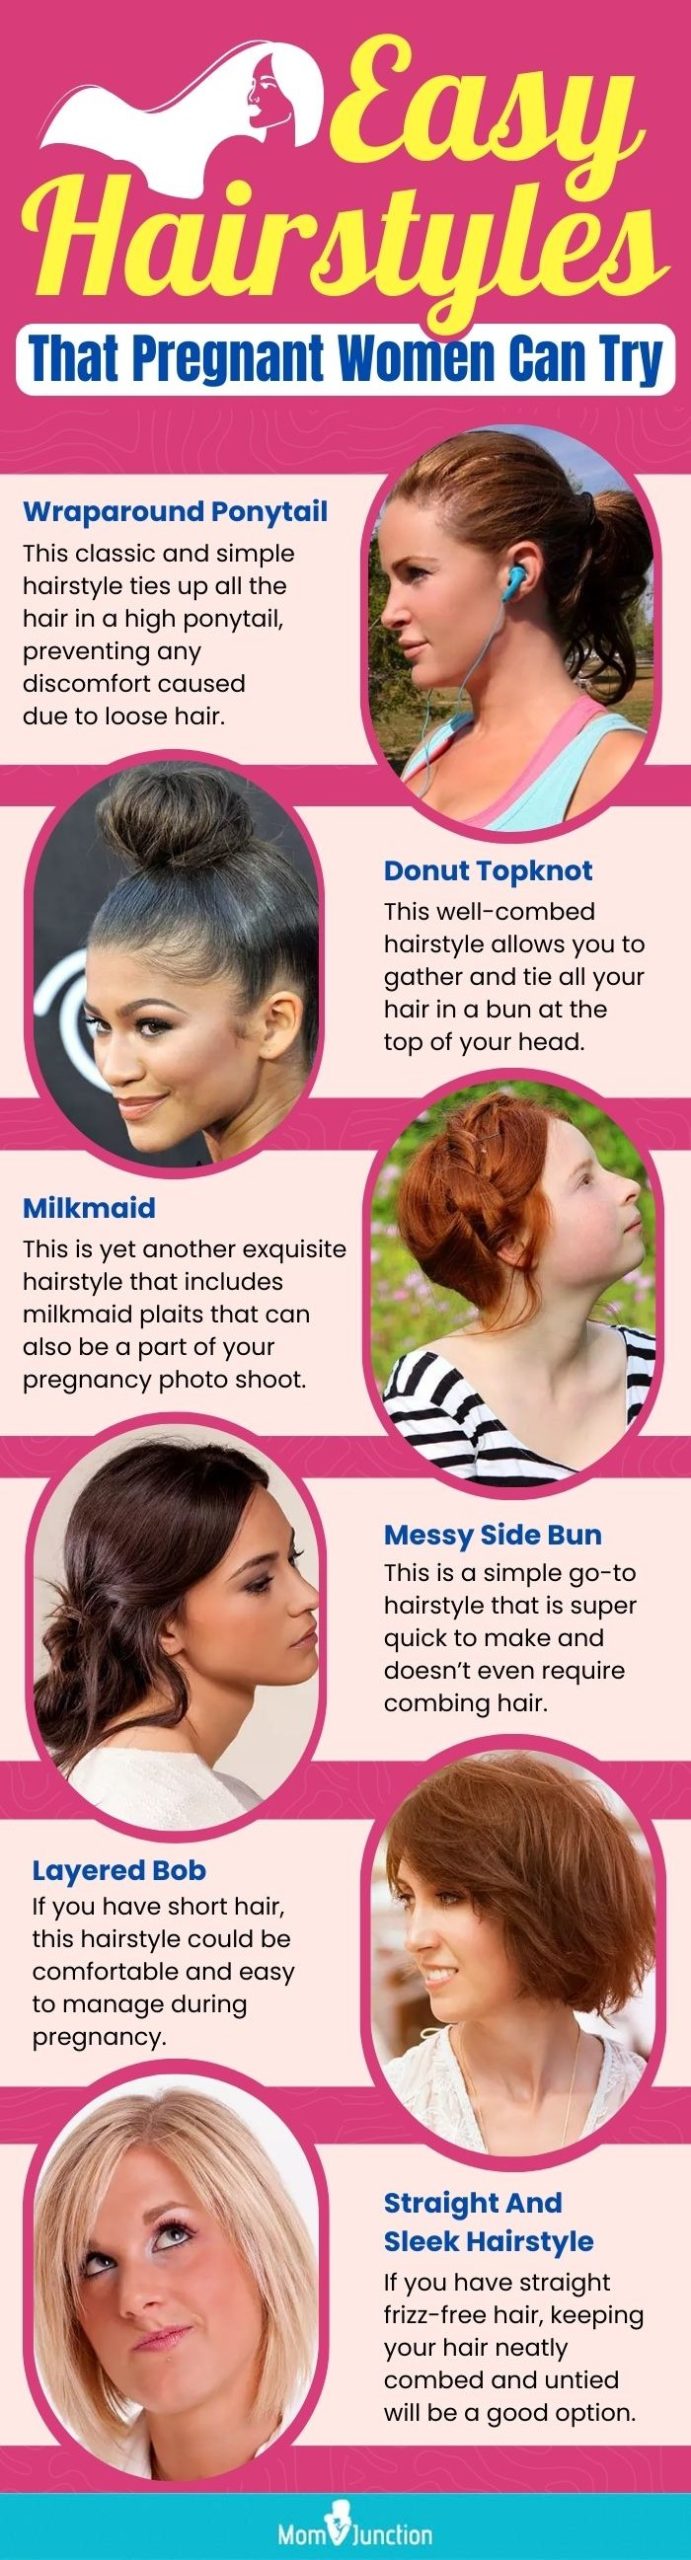 8 Fabulous Hairstyles For Pregnant Women